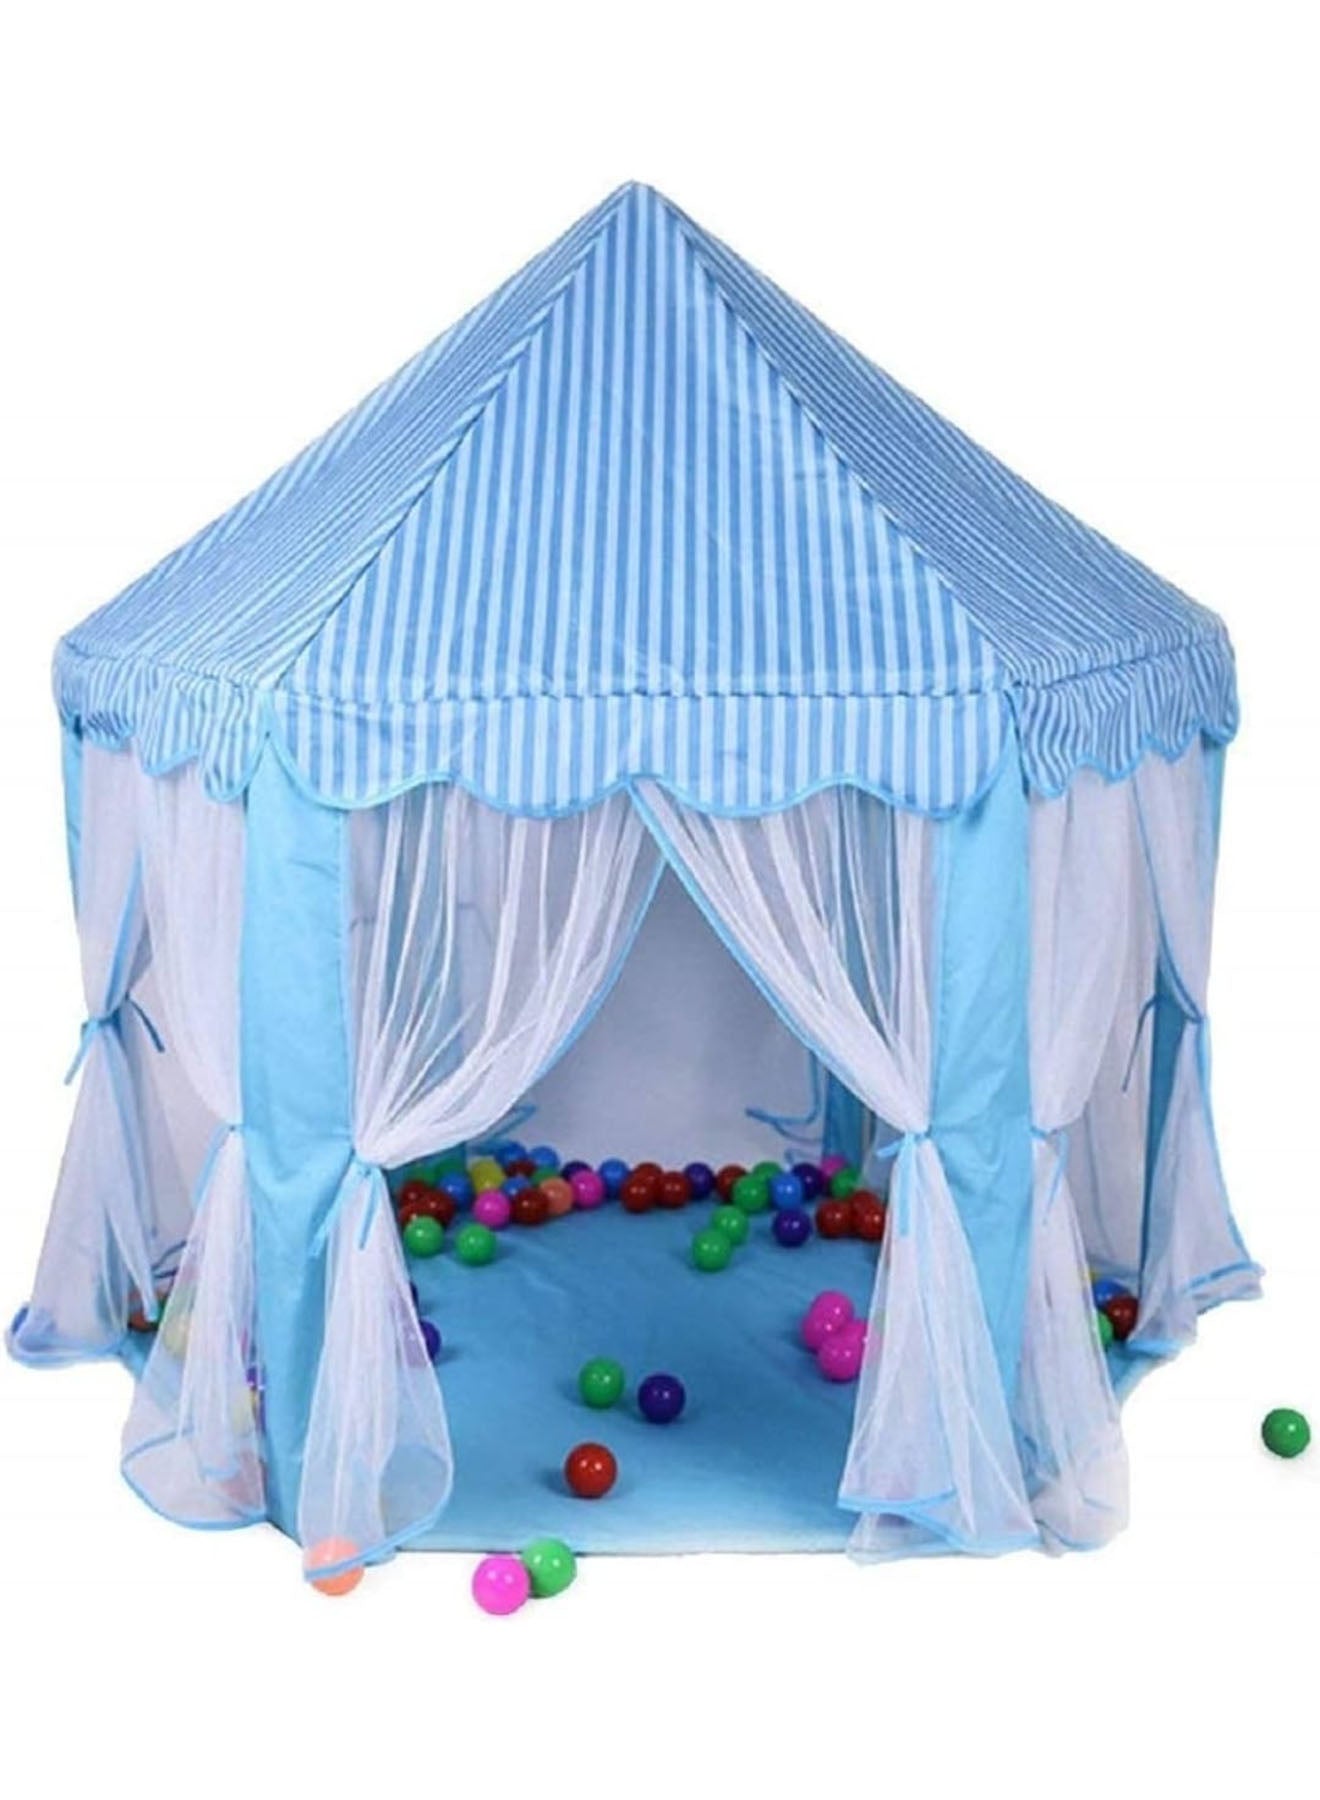 DANIM Large Indoor and Outdoor Kids Play House Kids Tent New children's hexagonal tent indoor and outdoor tulle princess prince tent mosquito proof breathable tent